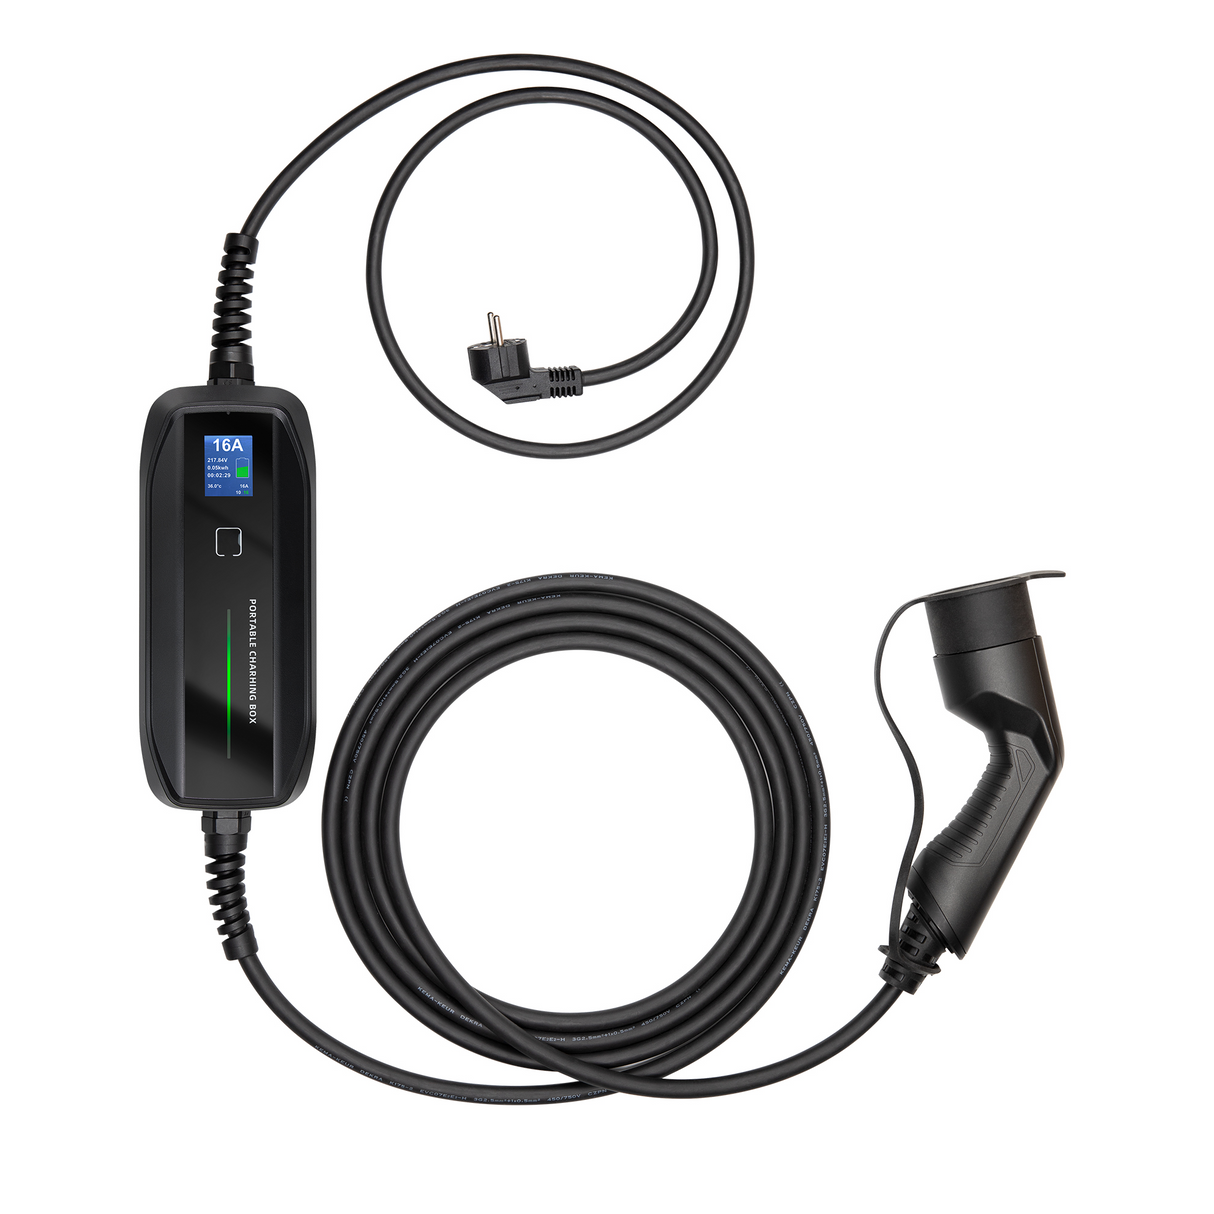 Mobile charger Seat Tarraco - Besen with LCD - Type 2 to Schuko